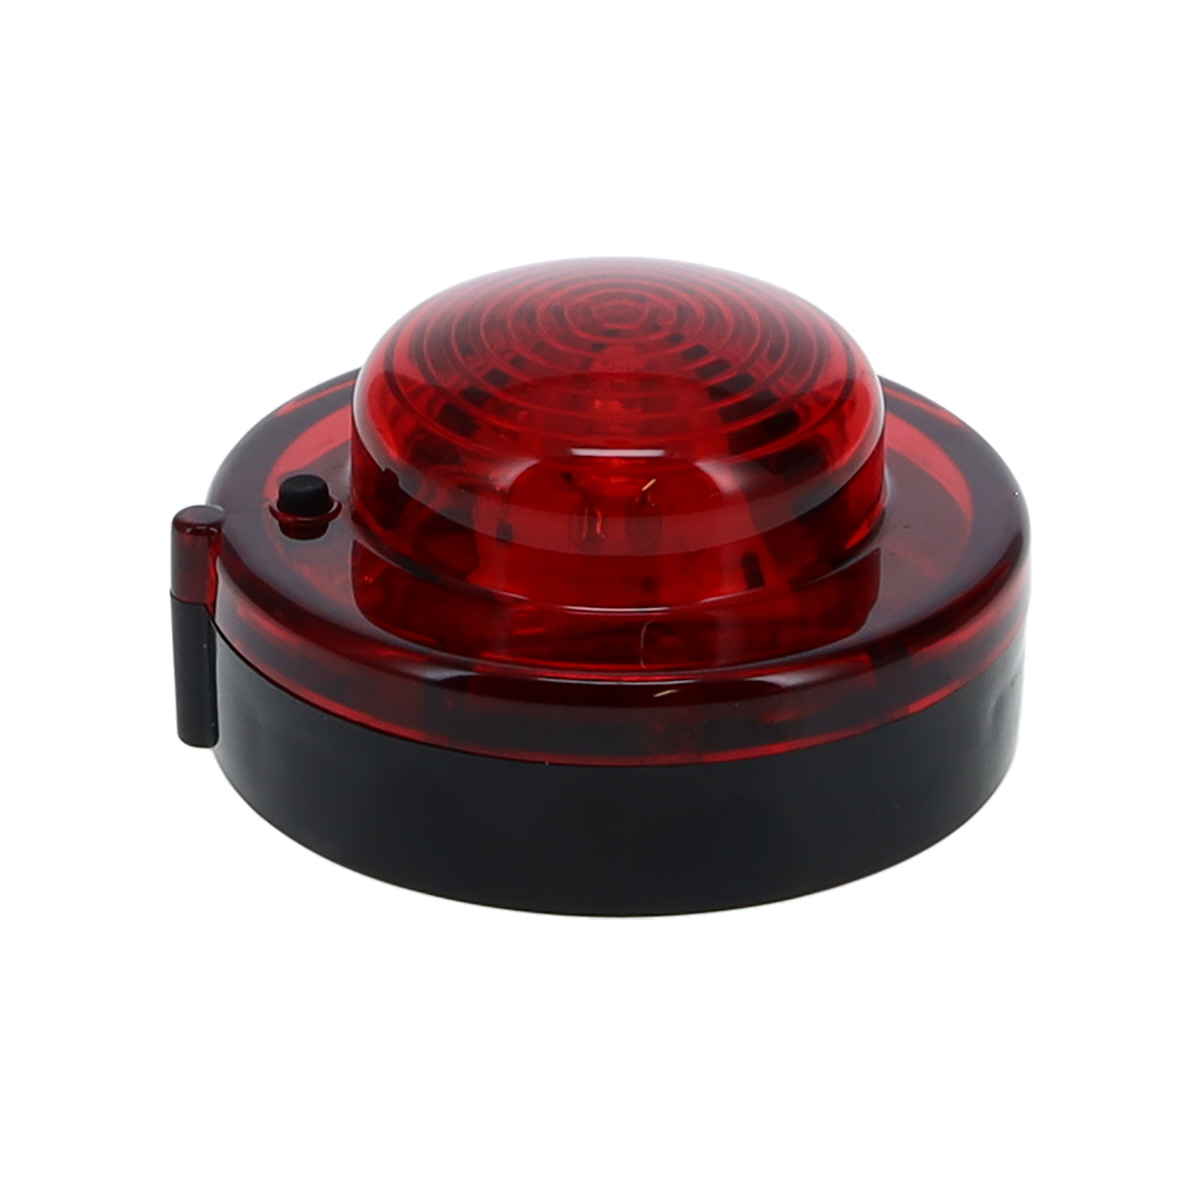 RoadPro LED Roadside Beacon RP911R Emergency Safety Warning Light Round Magnetic LED Flare with 360-Degree Visibility Red